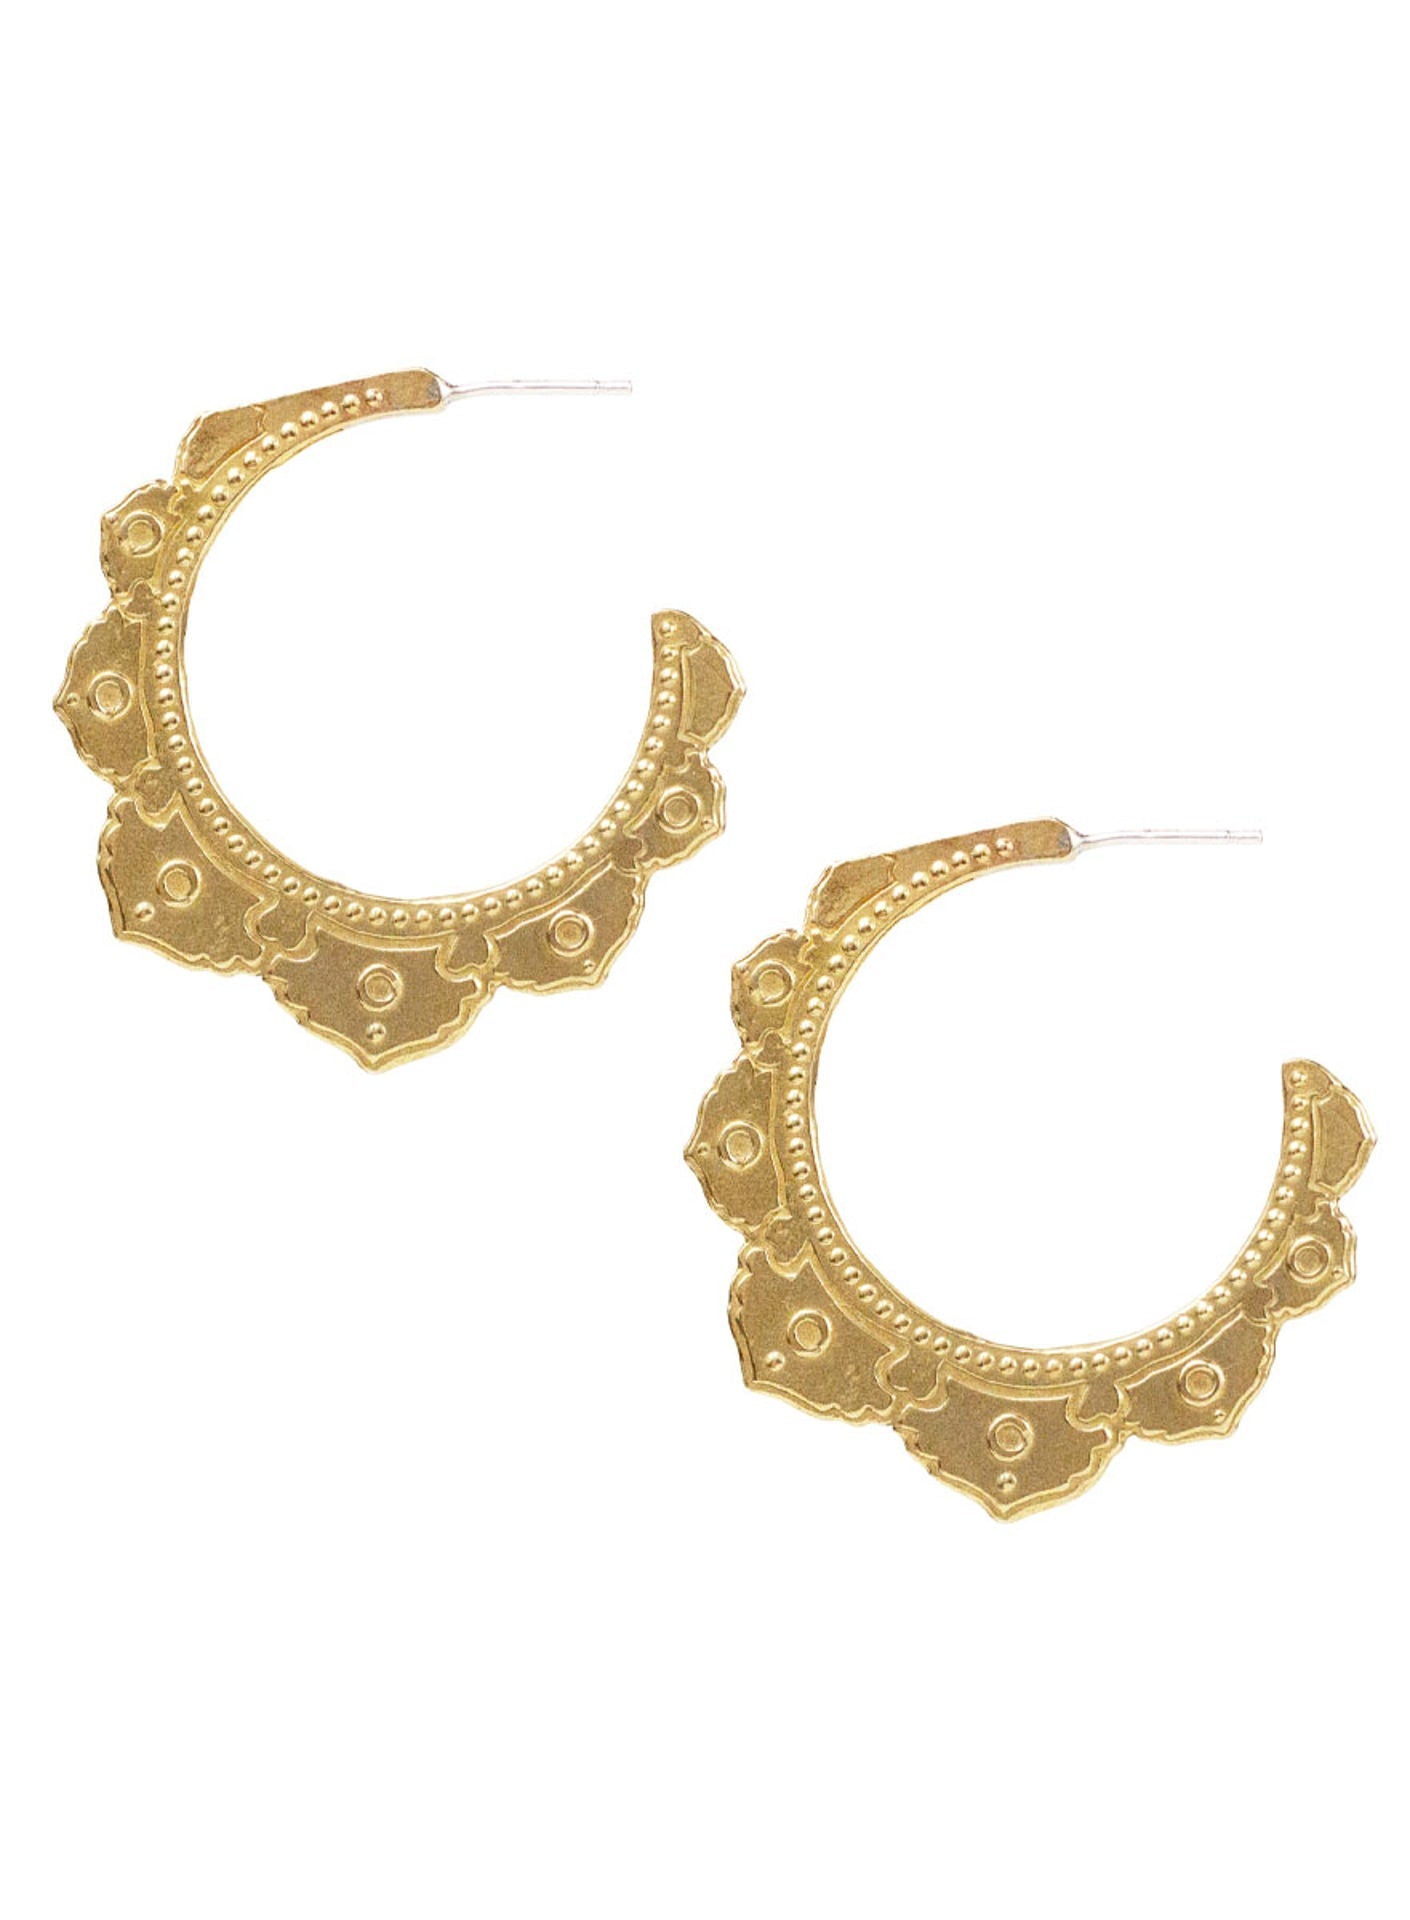 Tantra Hoops - Large - Bronze